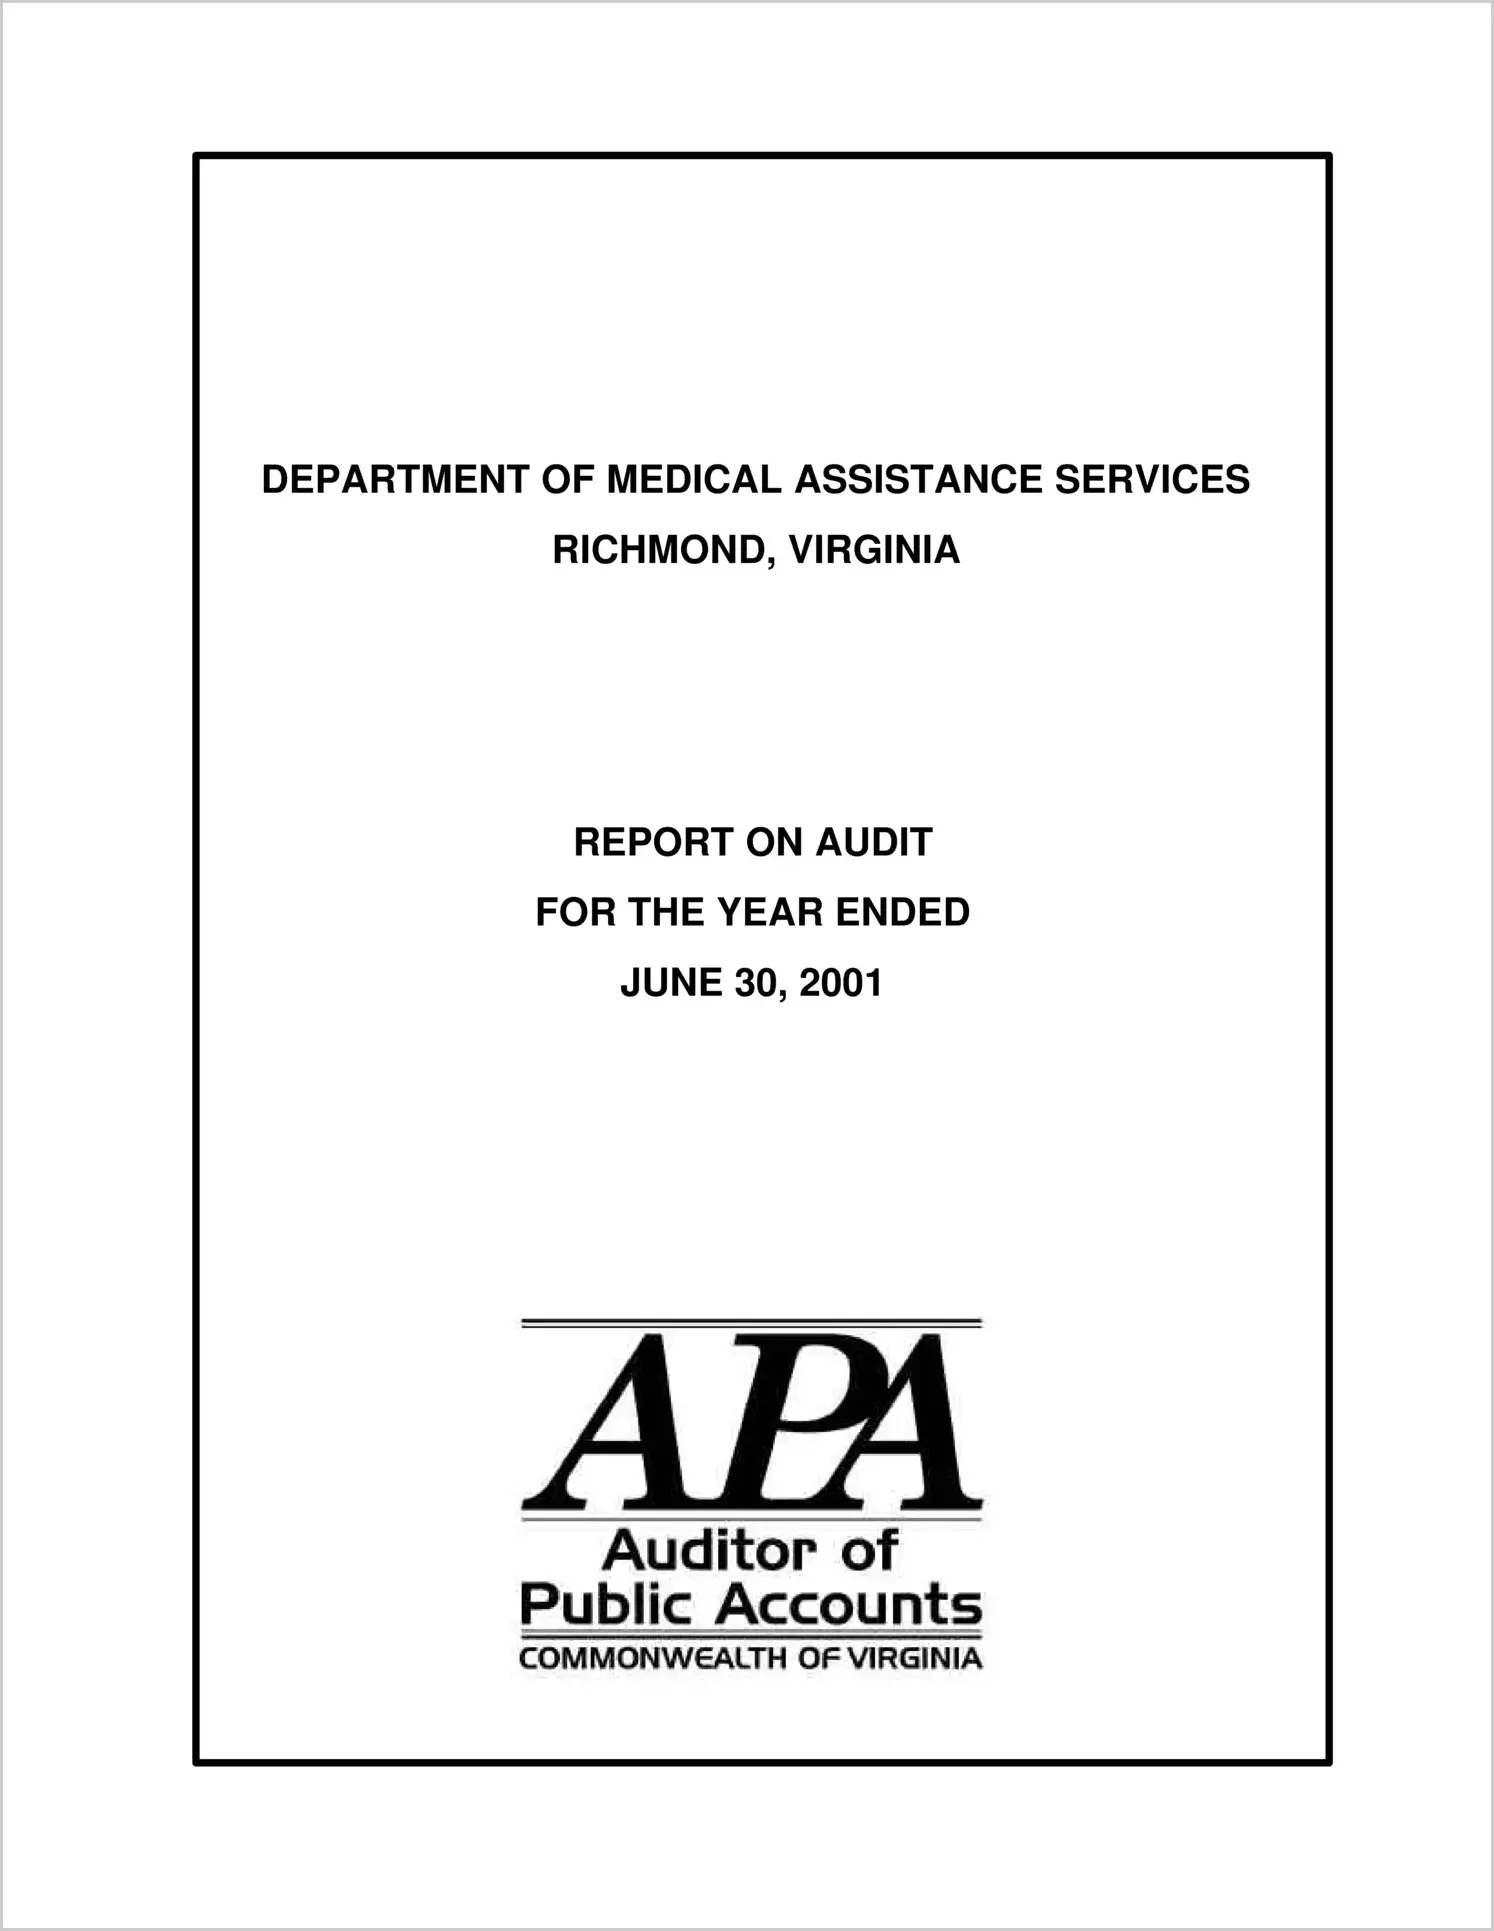 Department of Medical Assistance Services for the year ended June 30, 2001